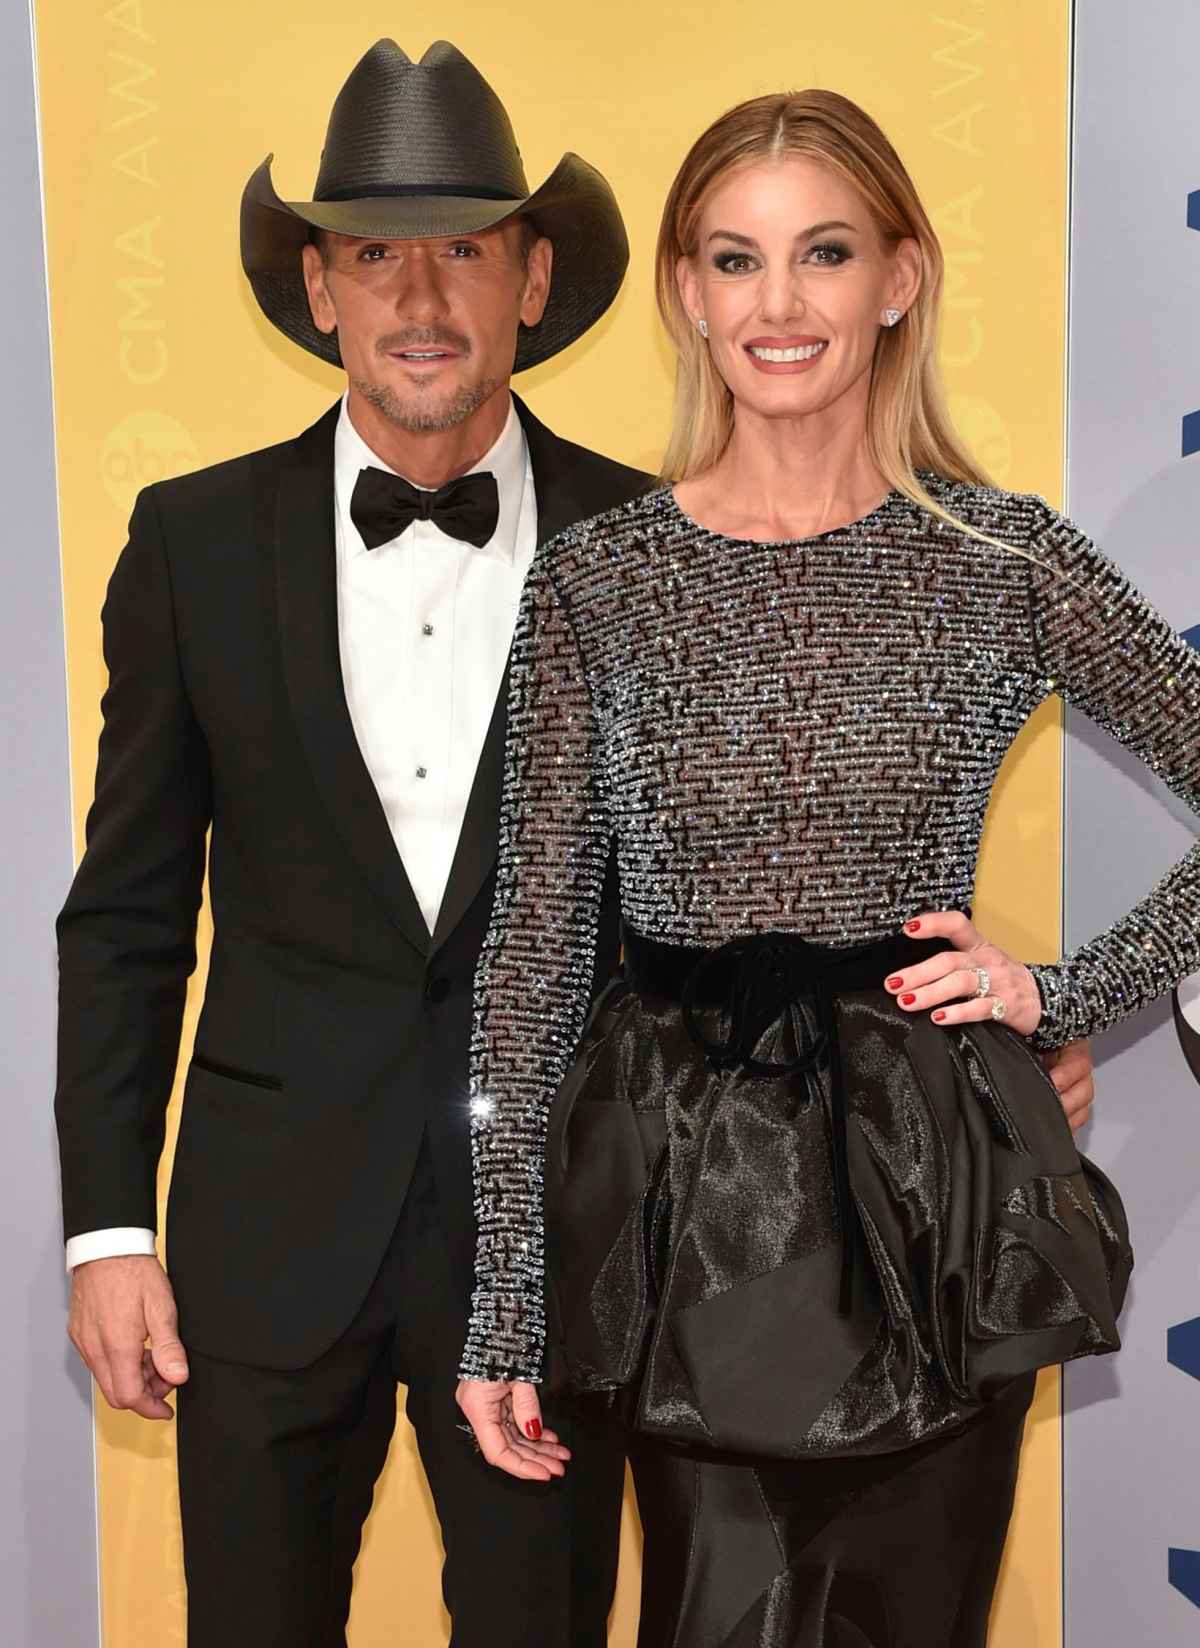 BREAKING: Tim McGraw and Faith Hill Announce Massive Live